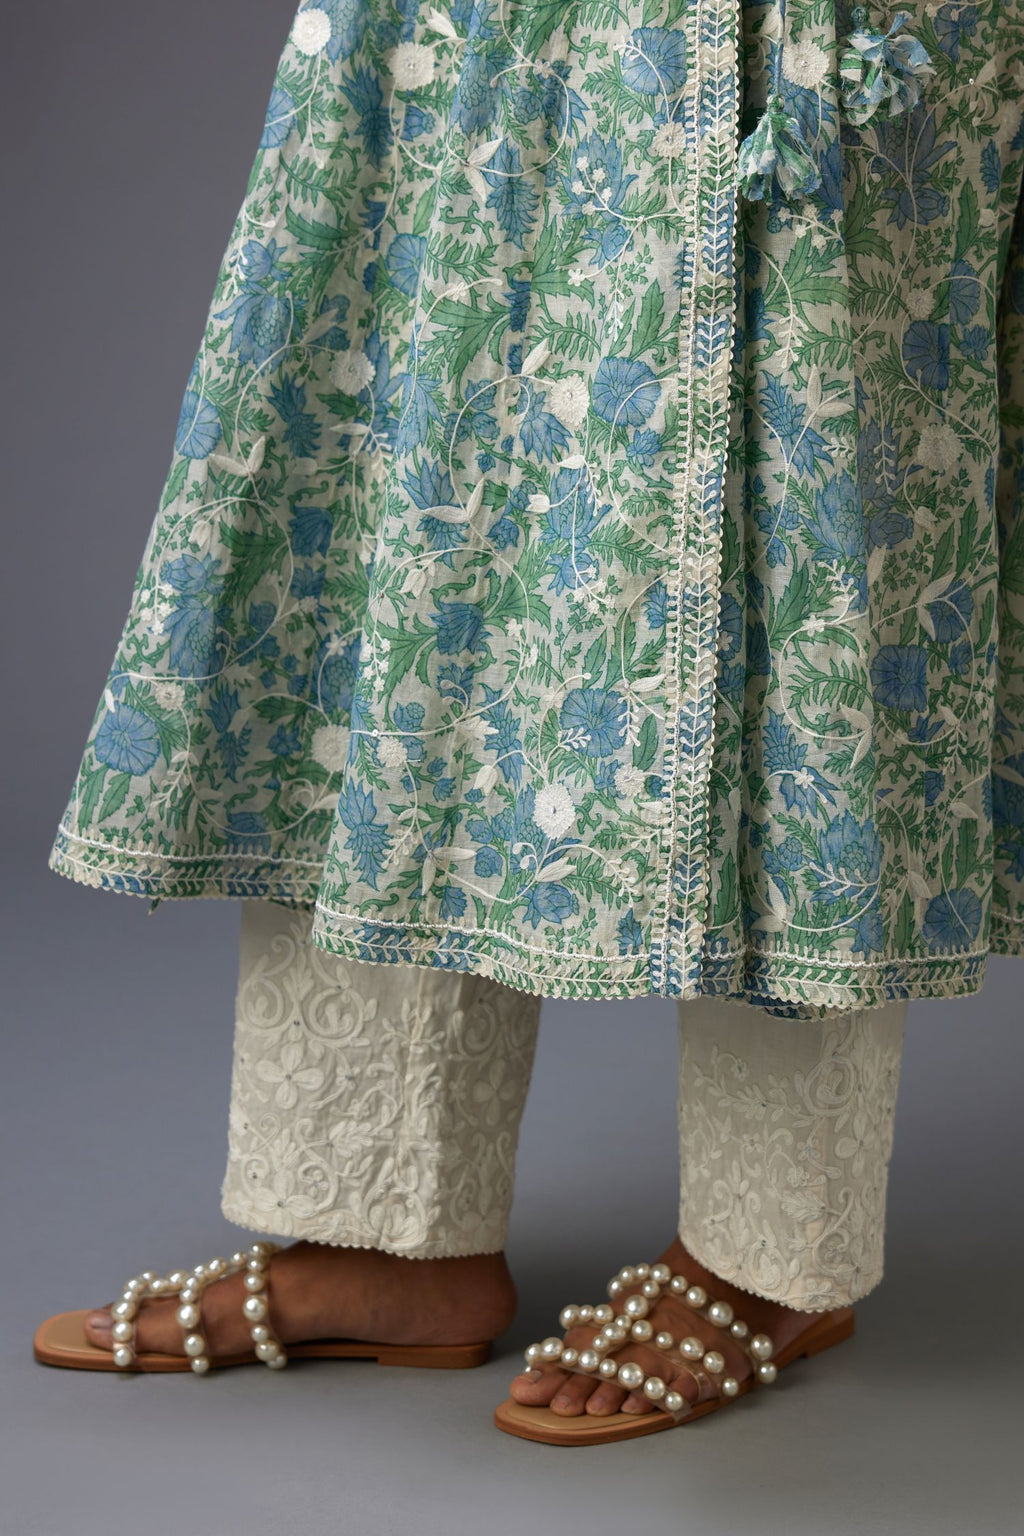 Blue and green hand block printed angrakha kurta set with white thread embroidery and sequins work all over.